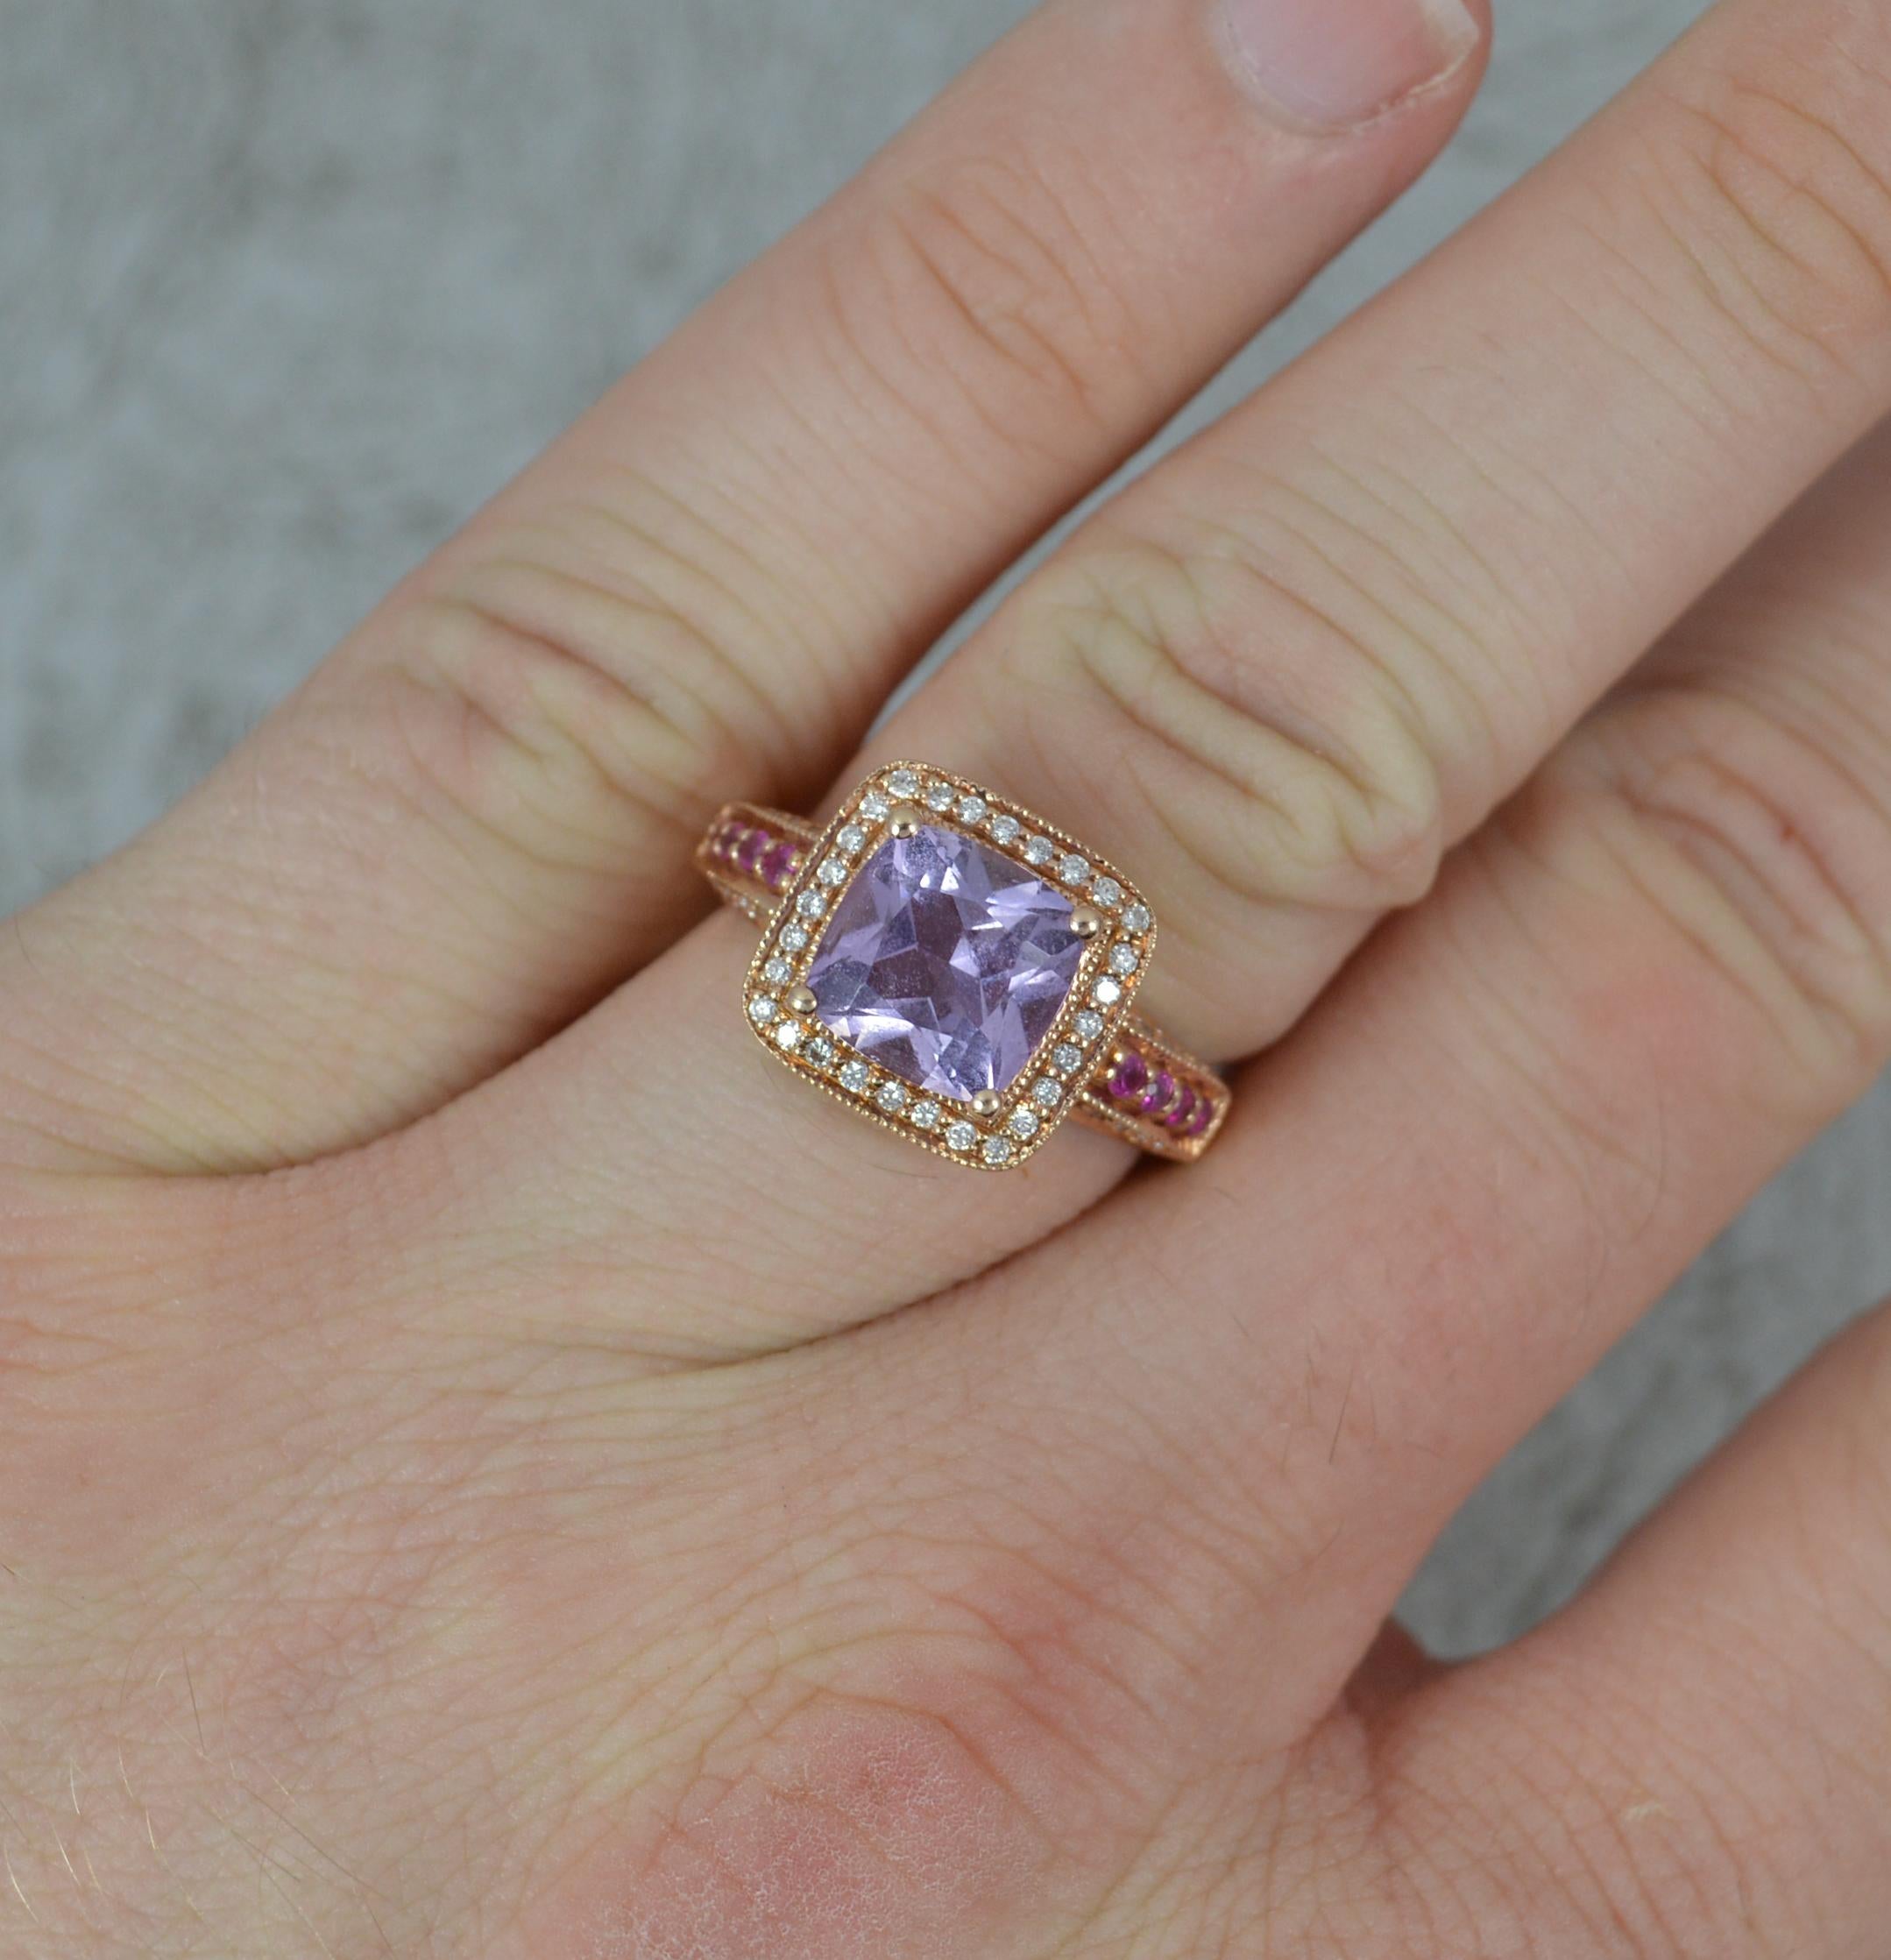 A beautiful Amethyst, Ruby and Diamond ring.
Solid 14 carat rose gold example with fine beaded finish.
Designed with a princess cushion cut amethyst to centre in four claw setting. A full diamond border. With rubies and diamonds to the